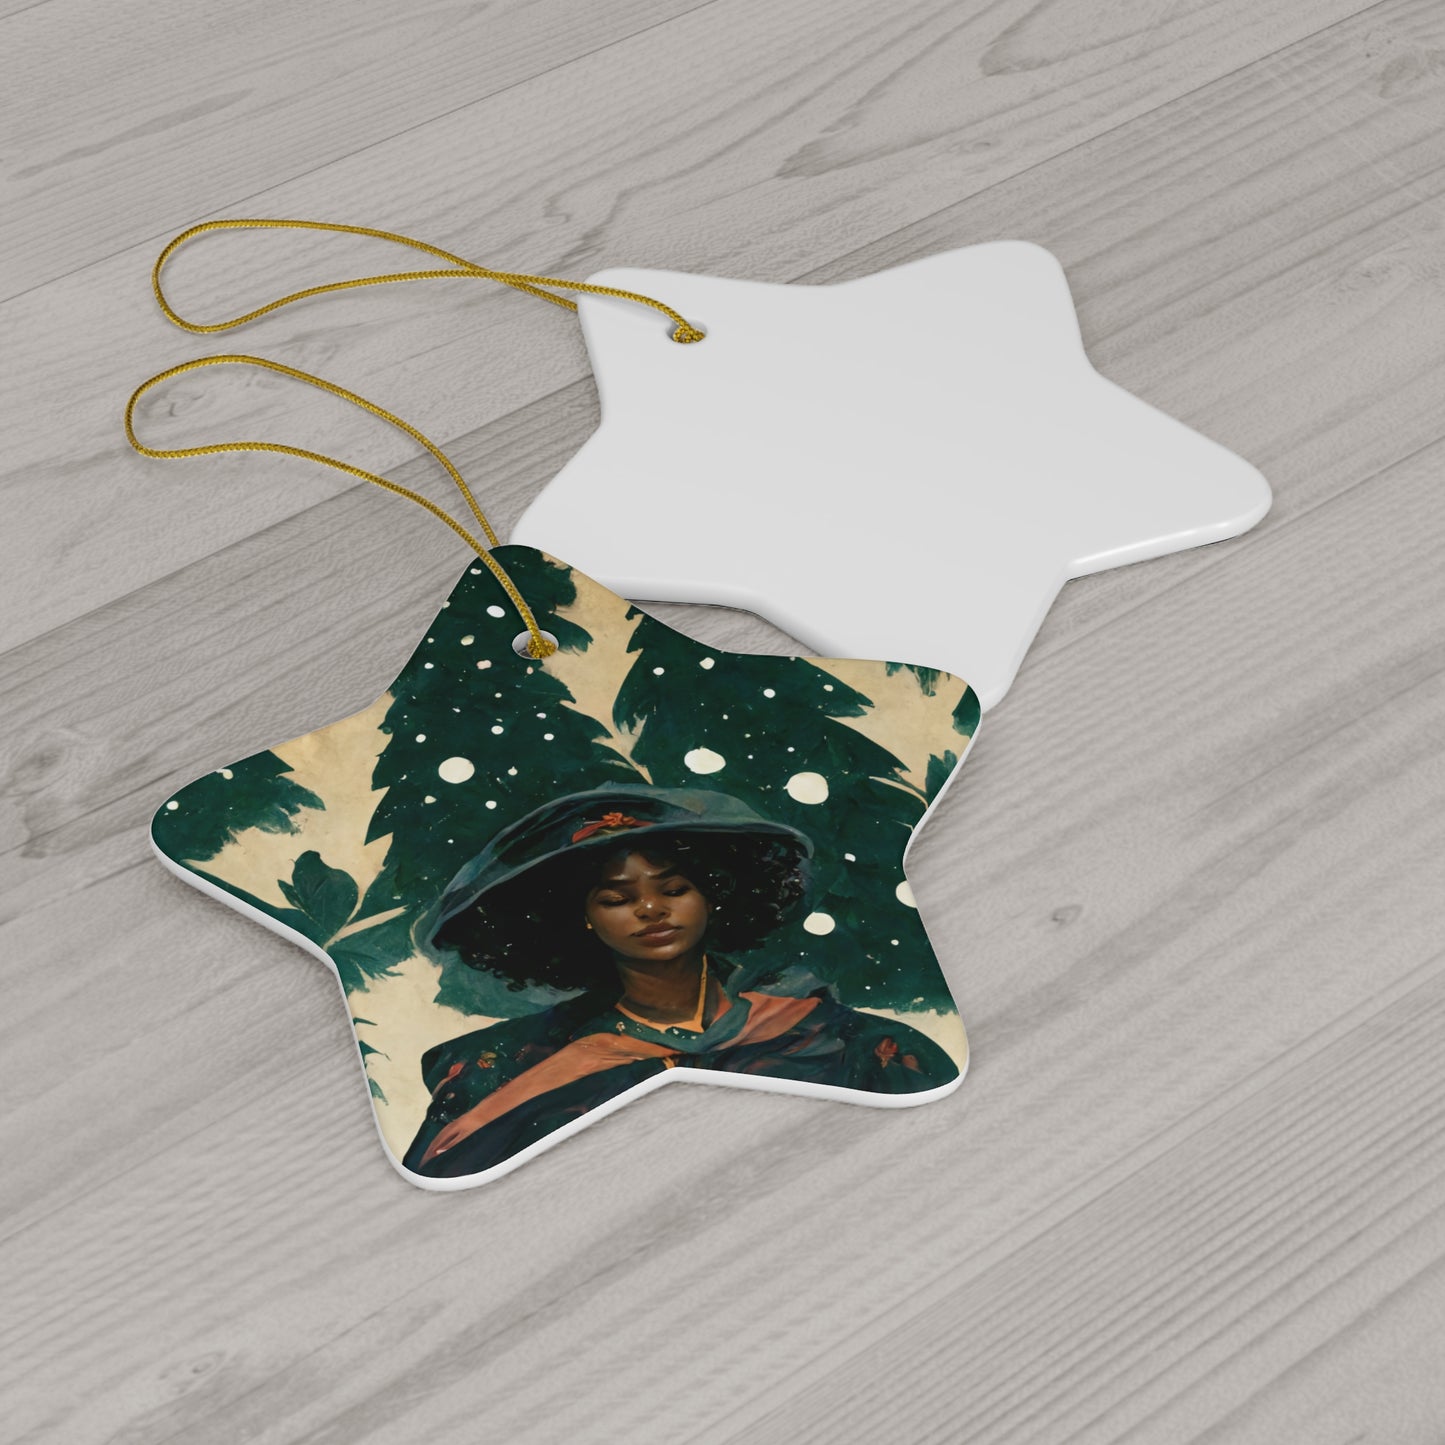 Yule Ornament - CERAMIC Witch with Pine Trees Yule Ornament - Blessed Yule! For Yule Tree, black woman, wiccan gift, pagan decor